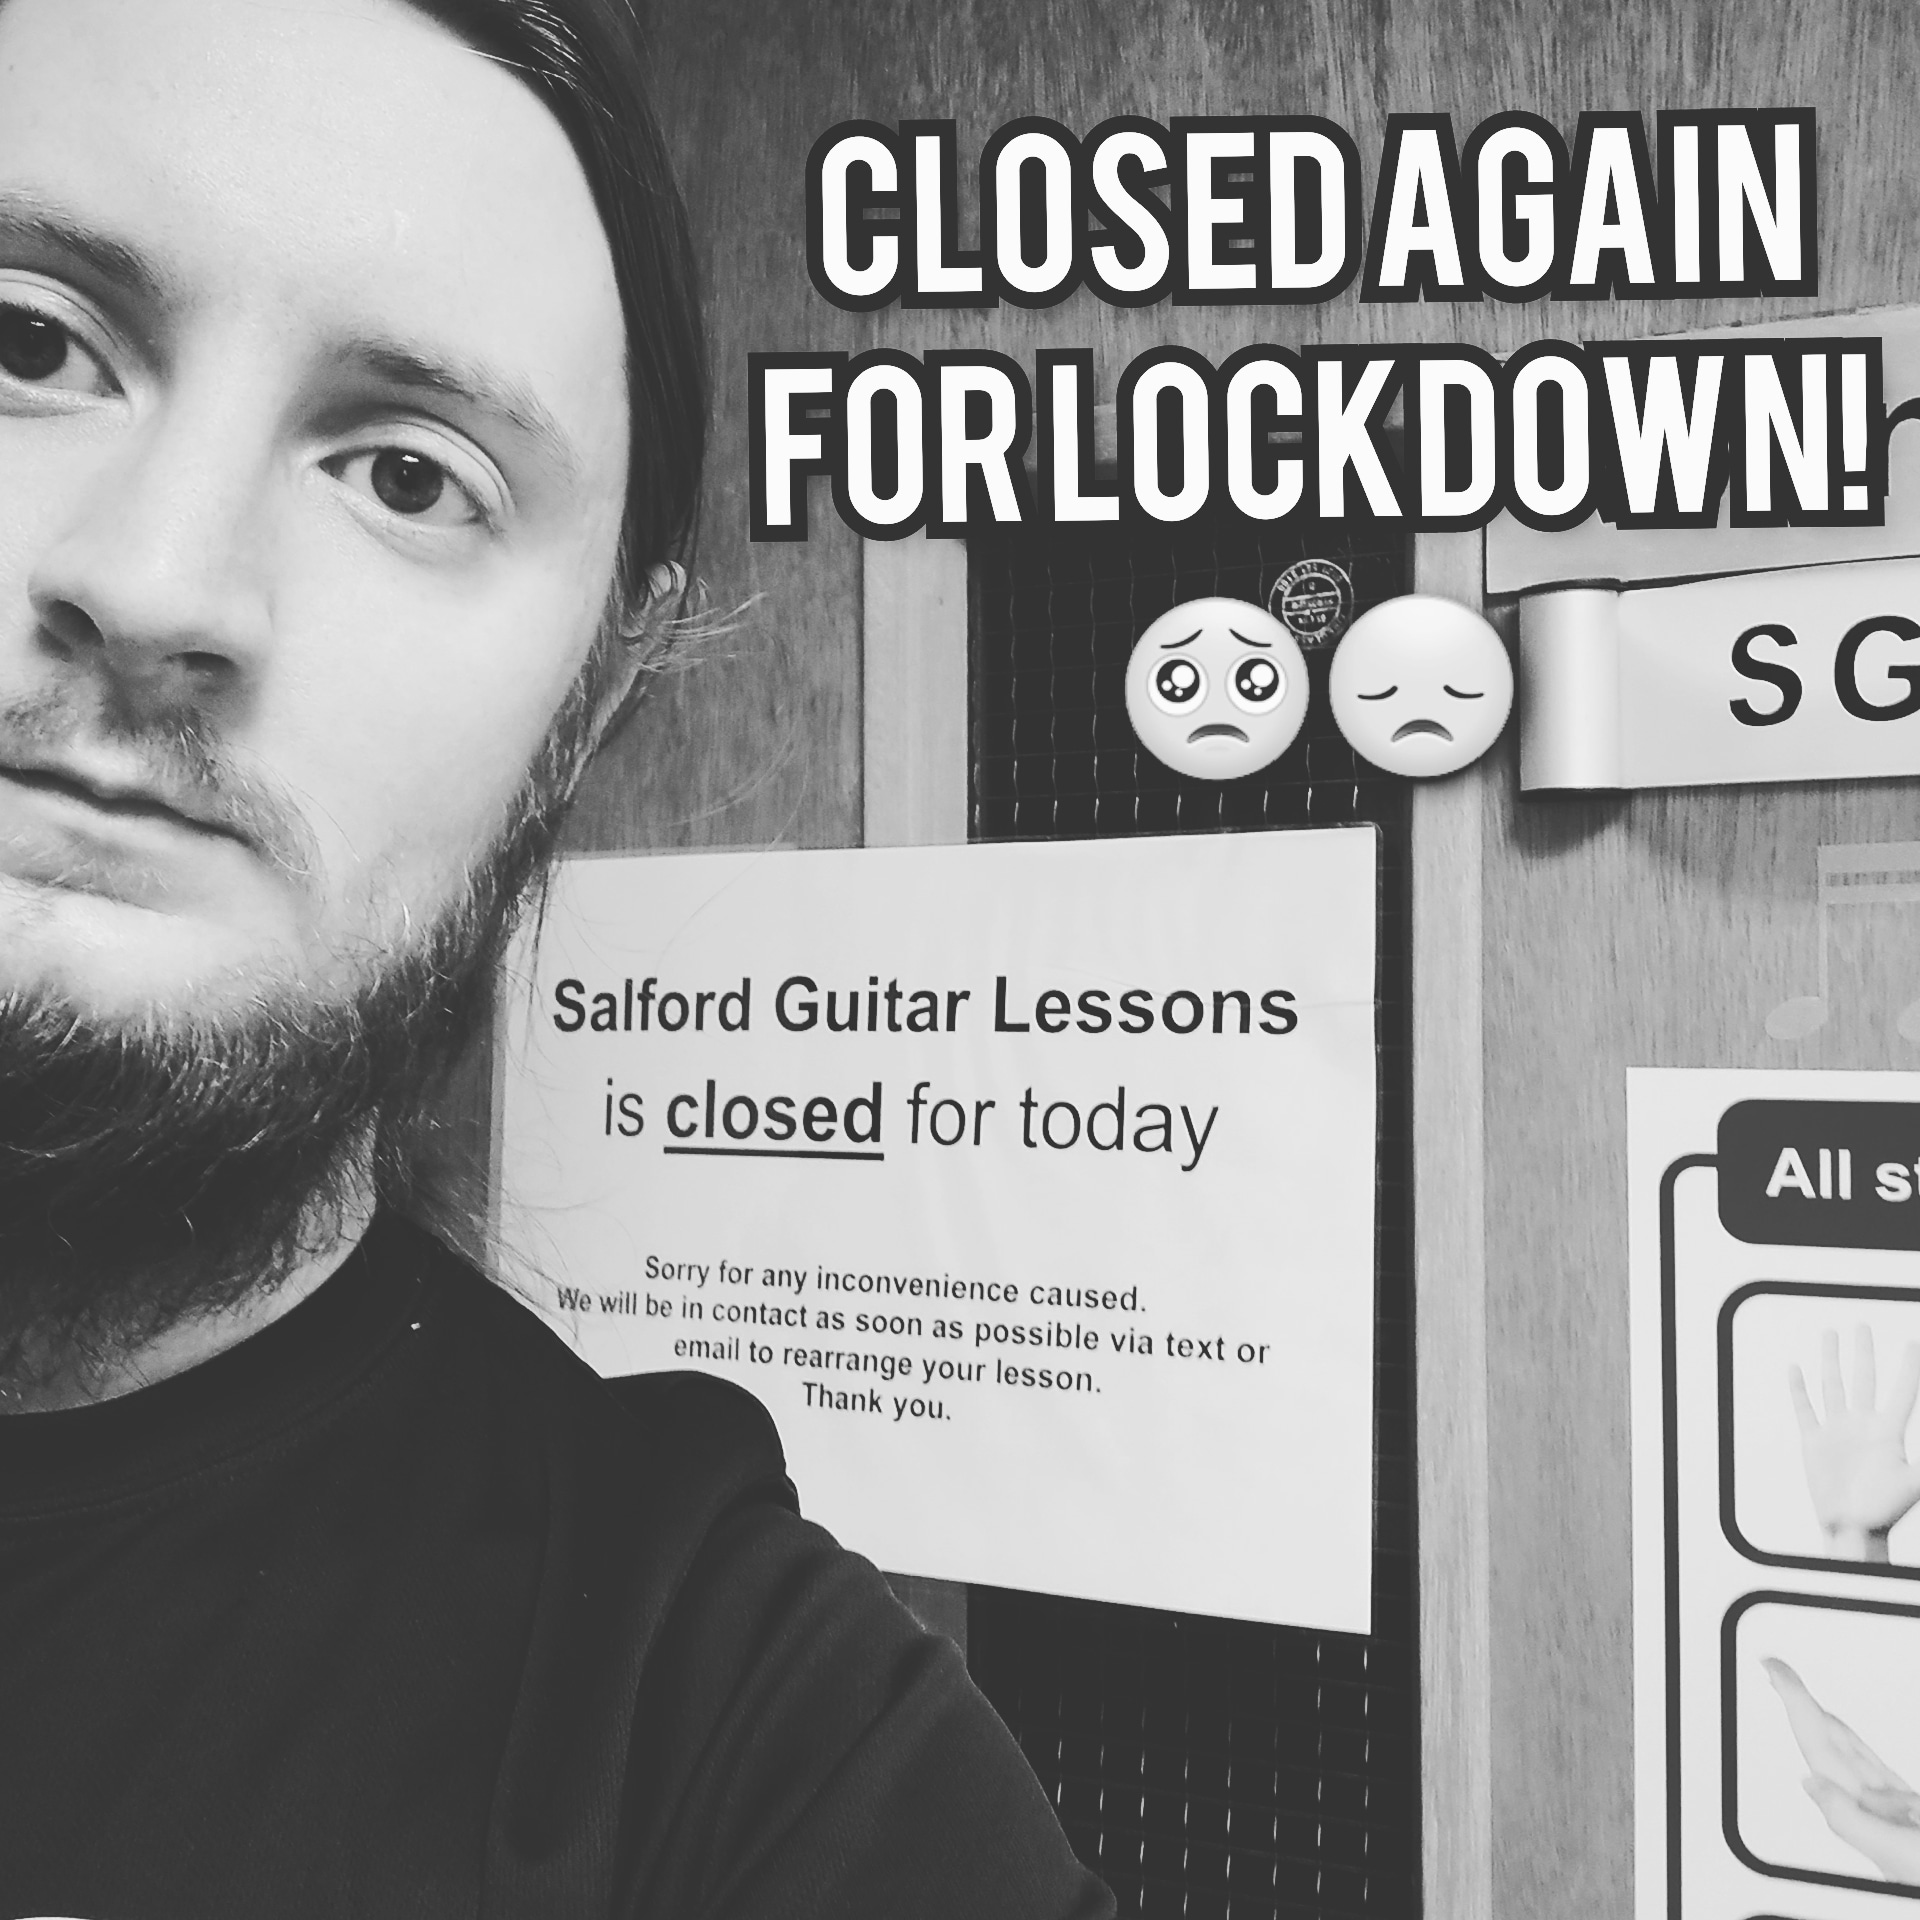 ⚠️ Our SGL studio is temporarily closed for lockdown…